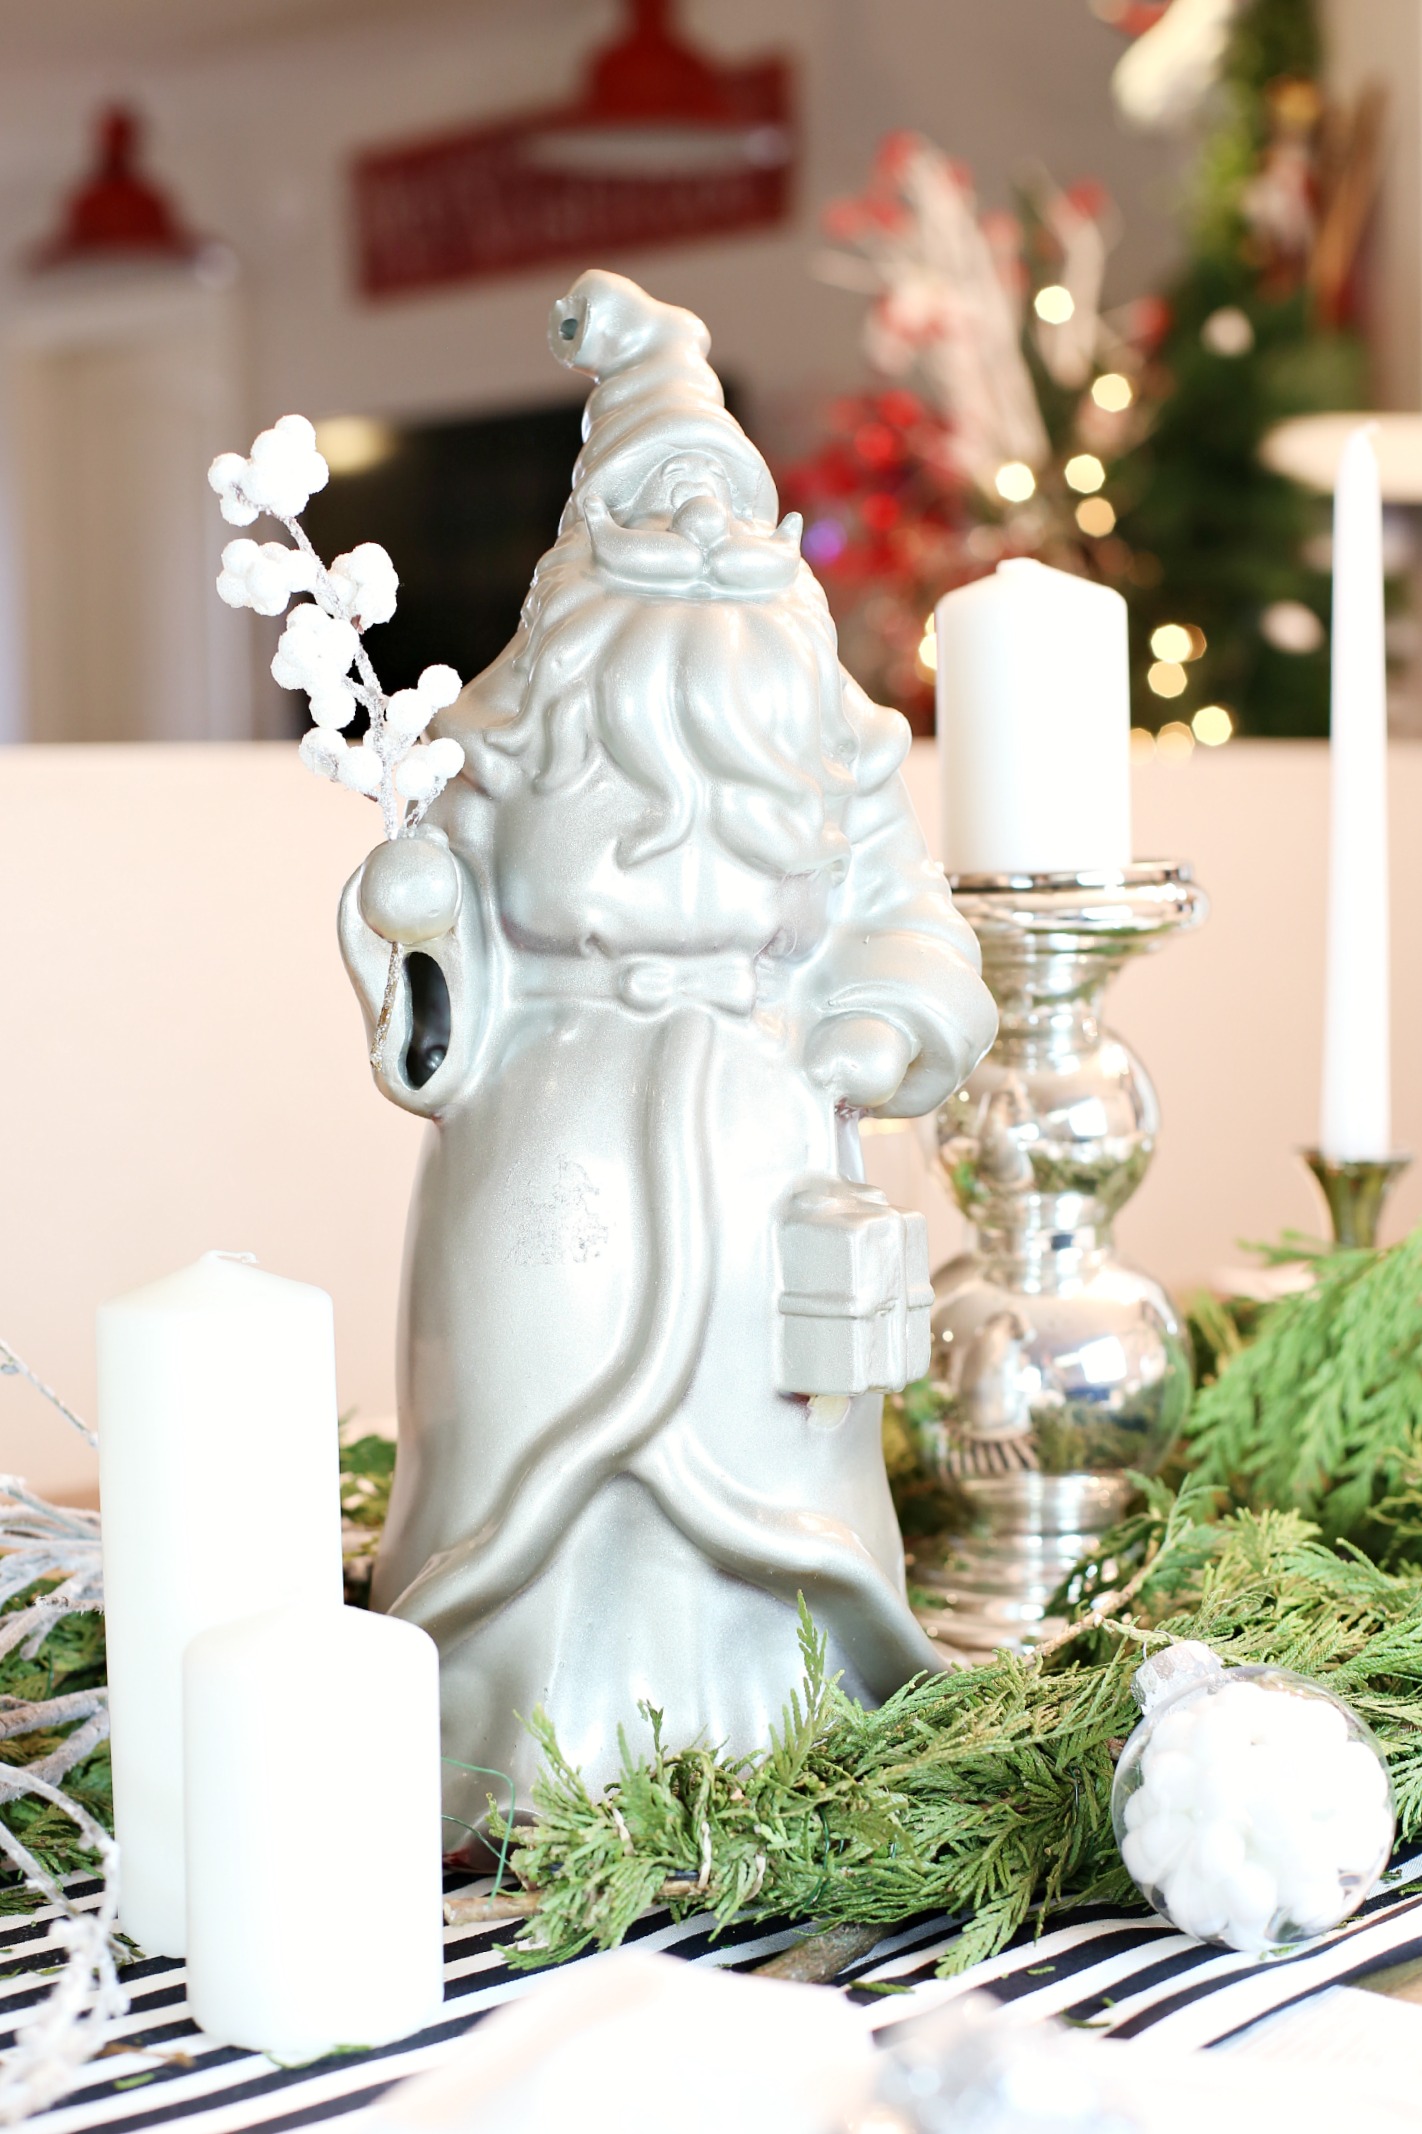 How to Refresh Old Holiday Decor